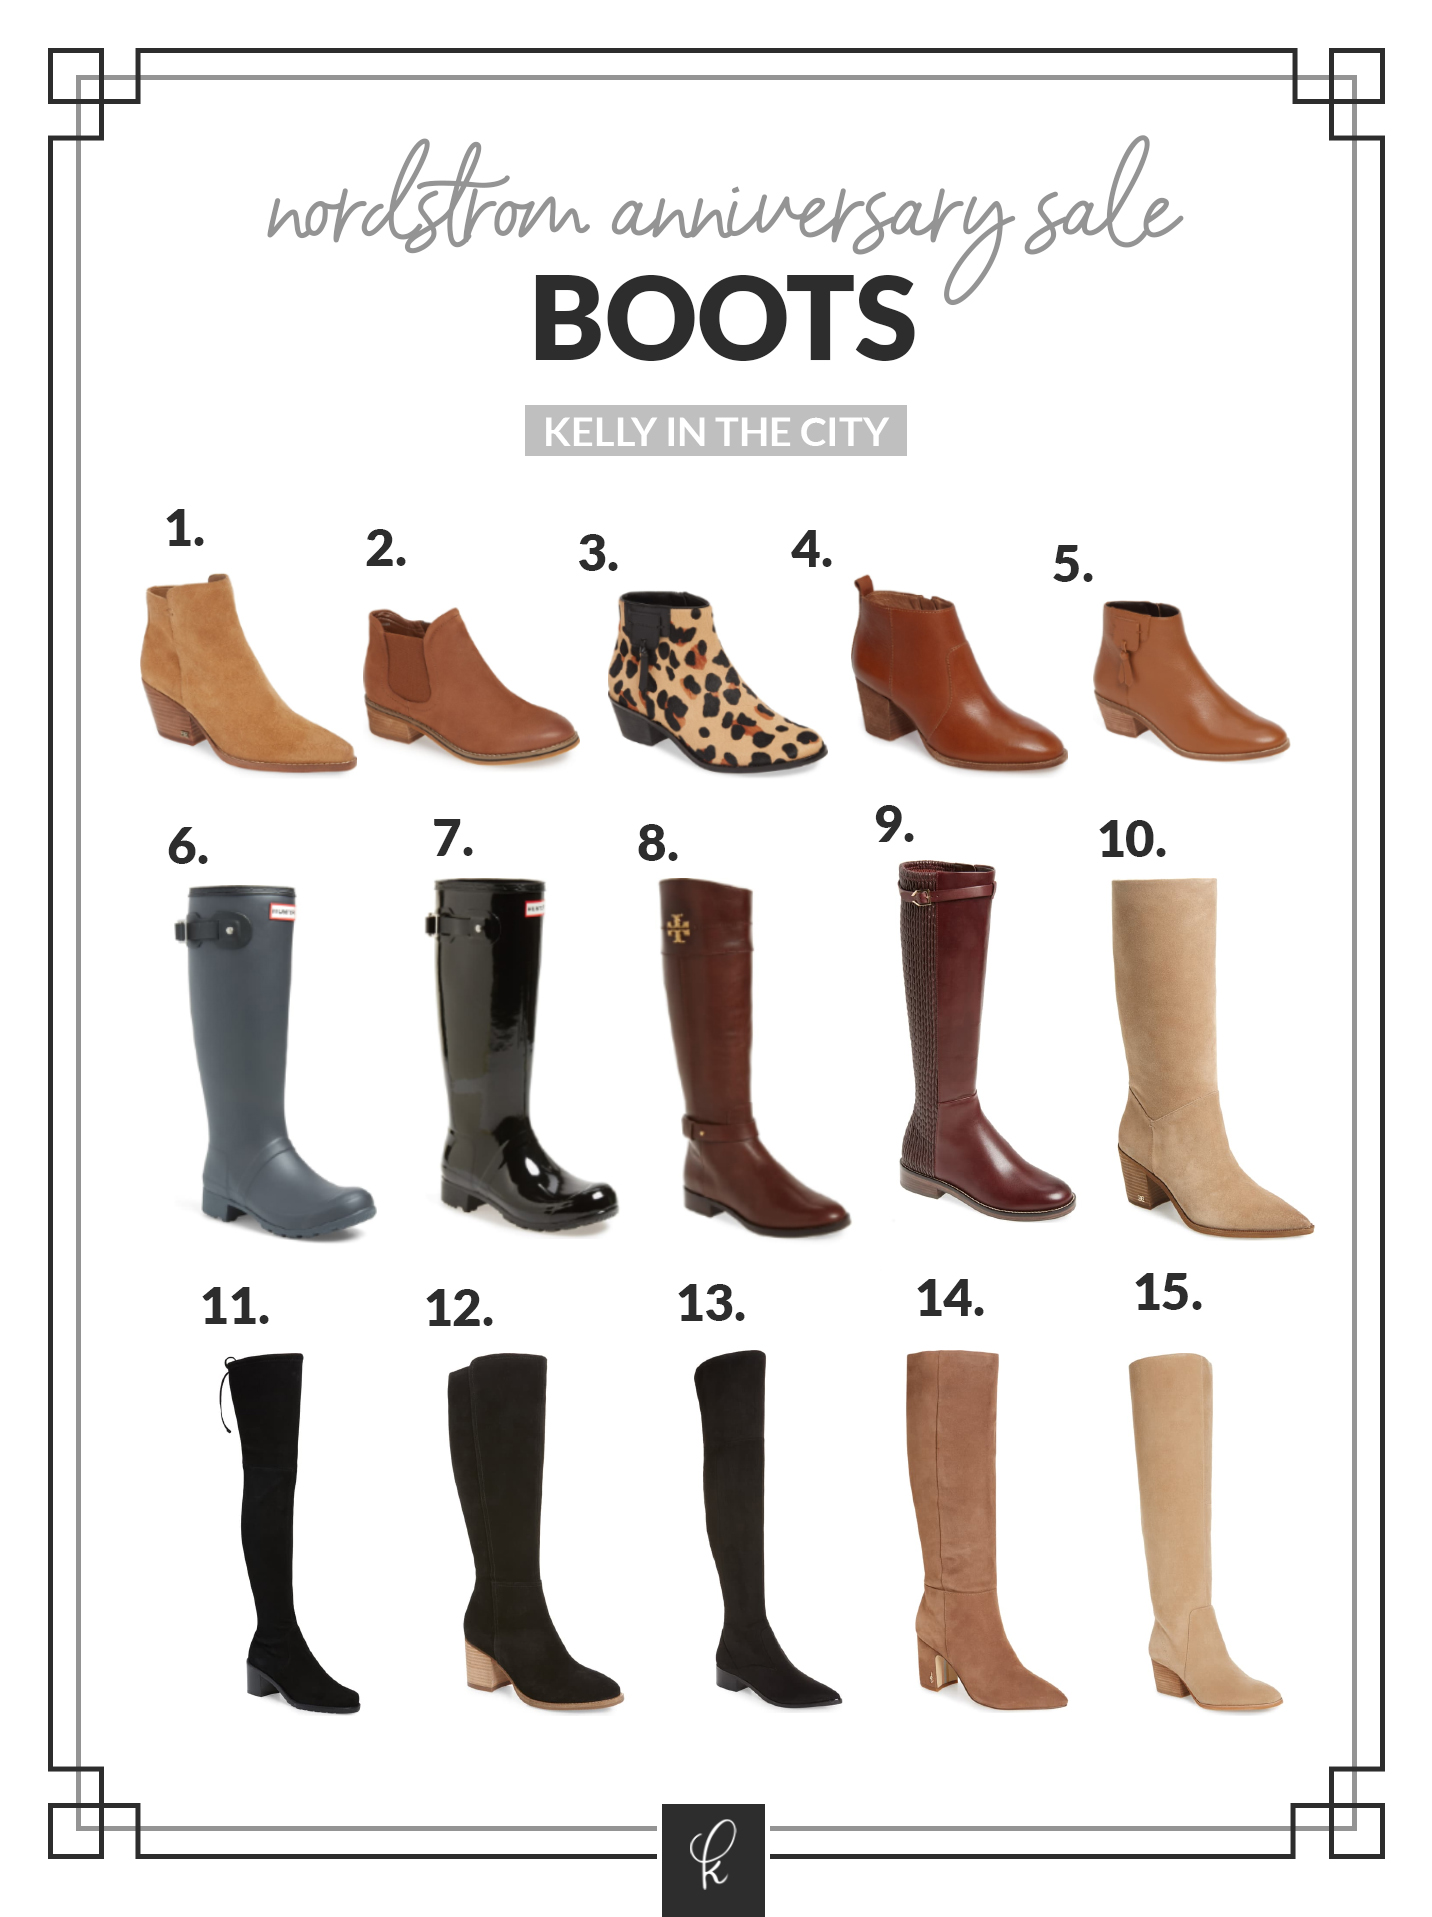 Preppy Guide to Shopping The Nordstrom Anniversary Sale - Boots